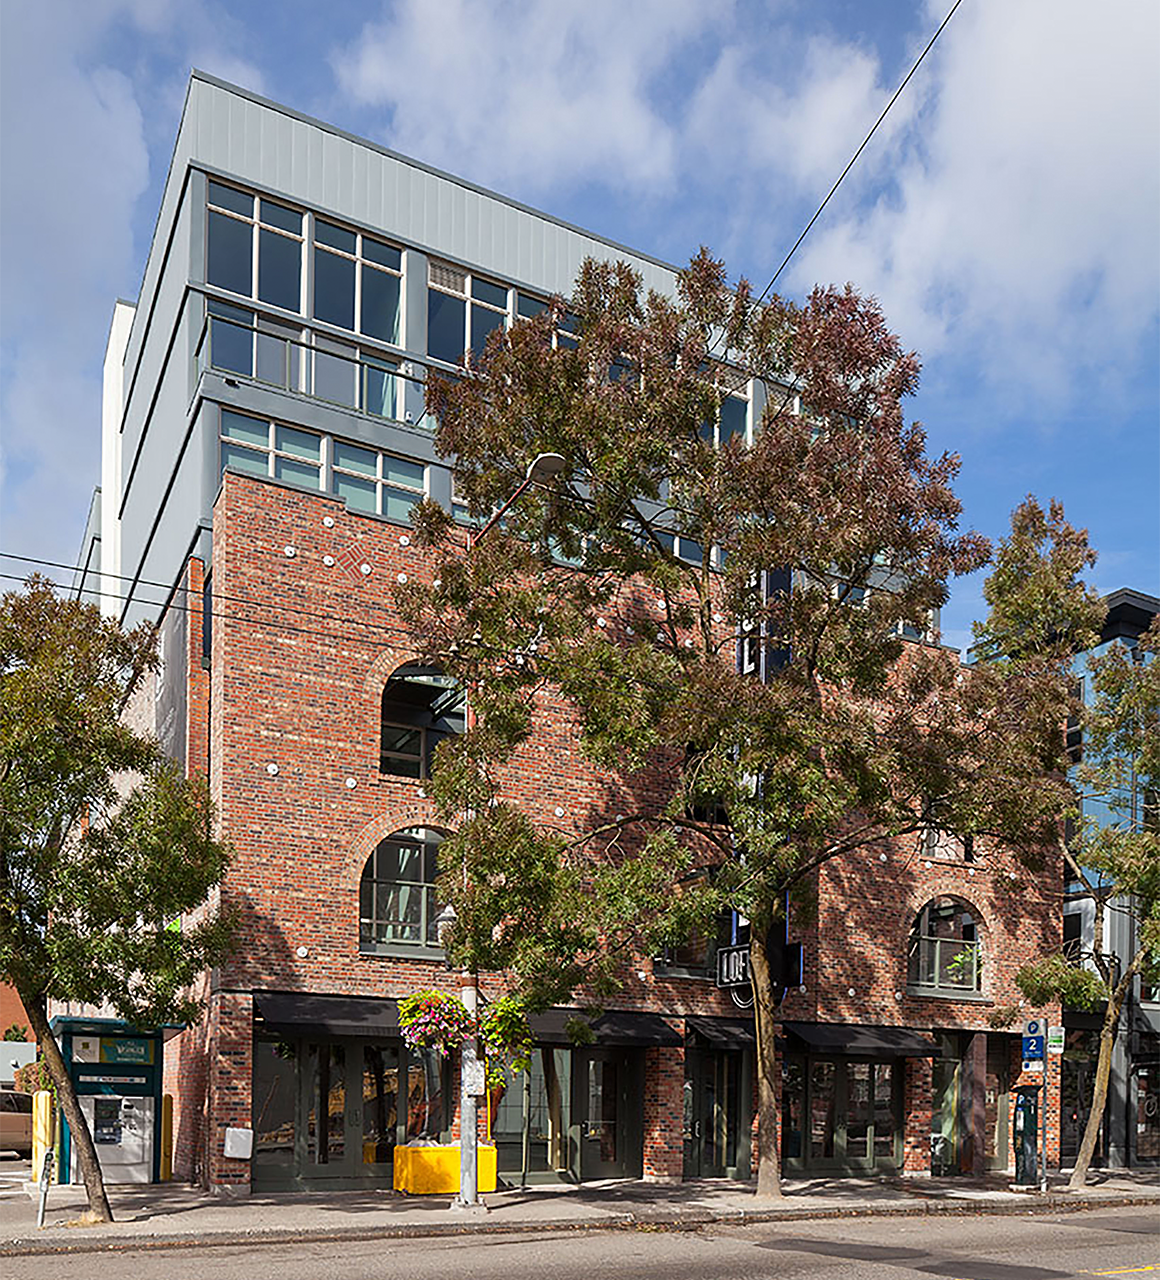 The Hollywood Lofts building is mostly red brick with large, rounded windows. Upper floors are painted gray and have tall square windows. A green and brown tree obscures some of the building.